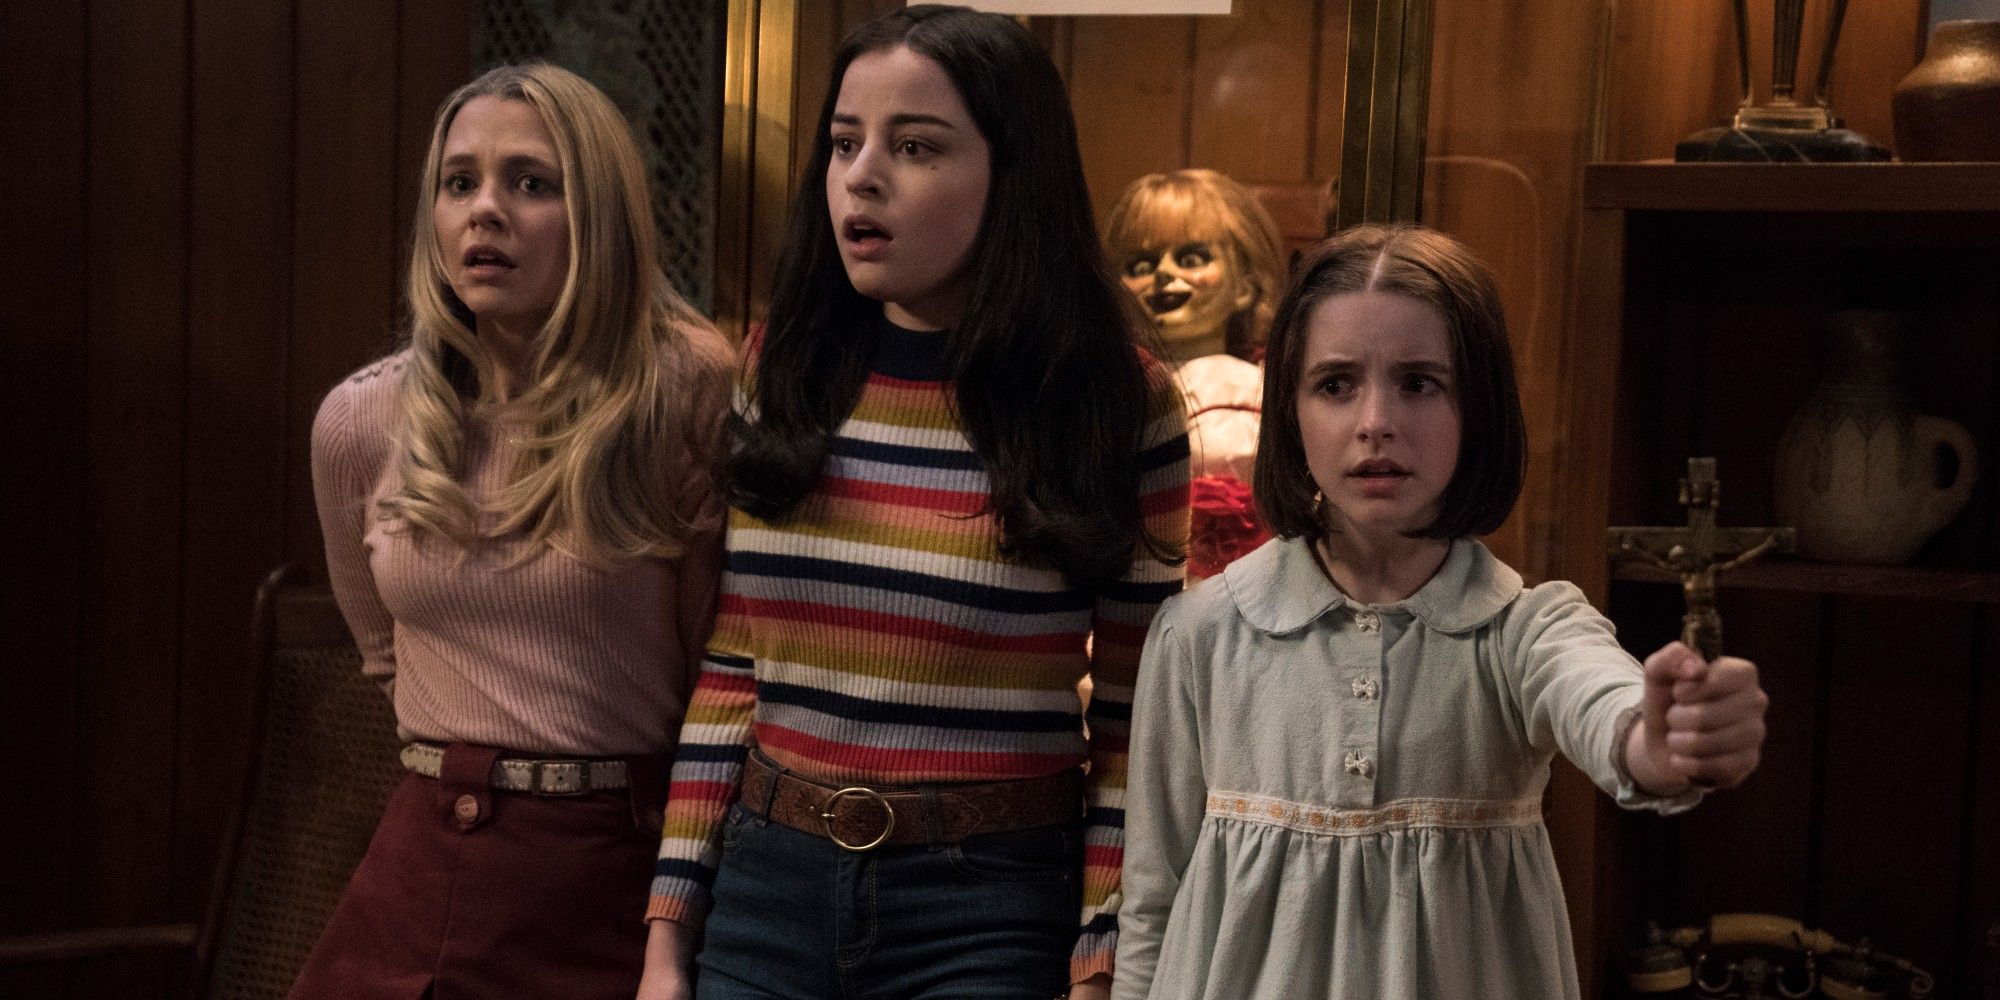 Mckenna Grace in movie "Annabelle Comes Home"